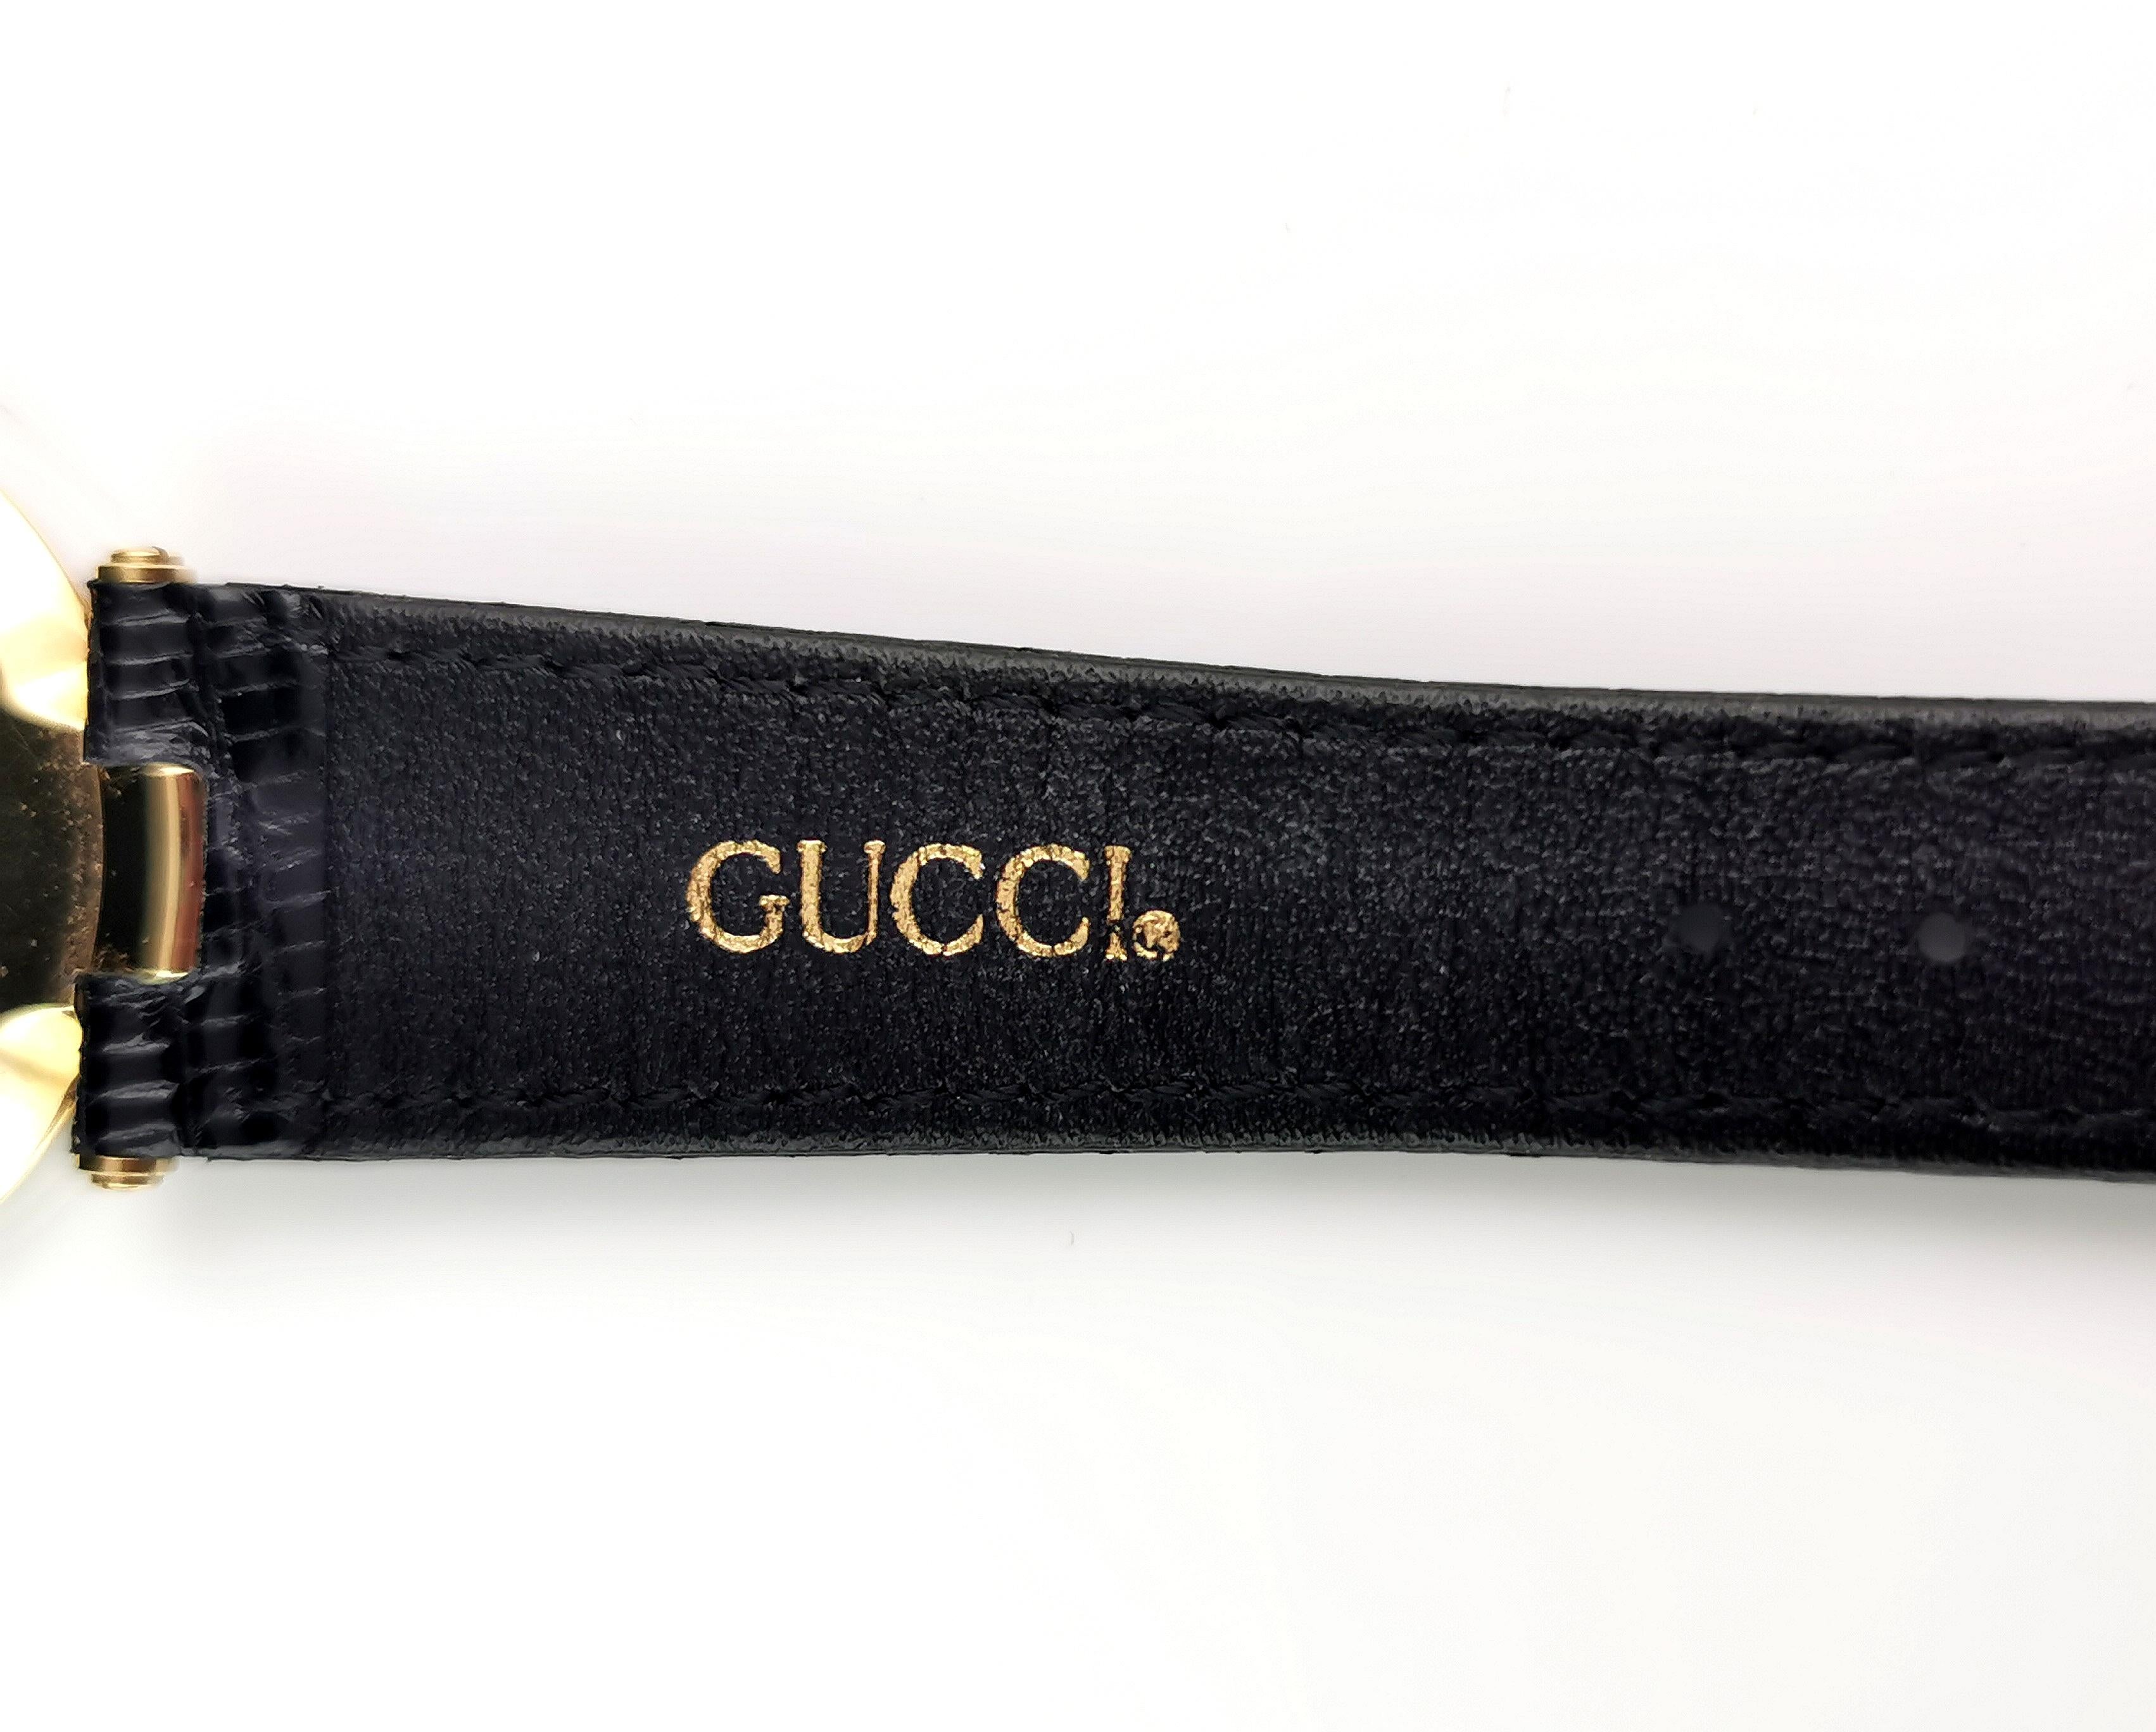 Gucci 4500m wristwatch, gold plated, stainless steel, Leather strap  For Sale 1